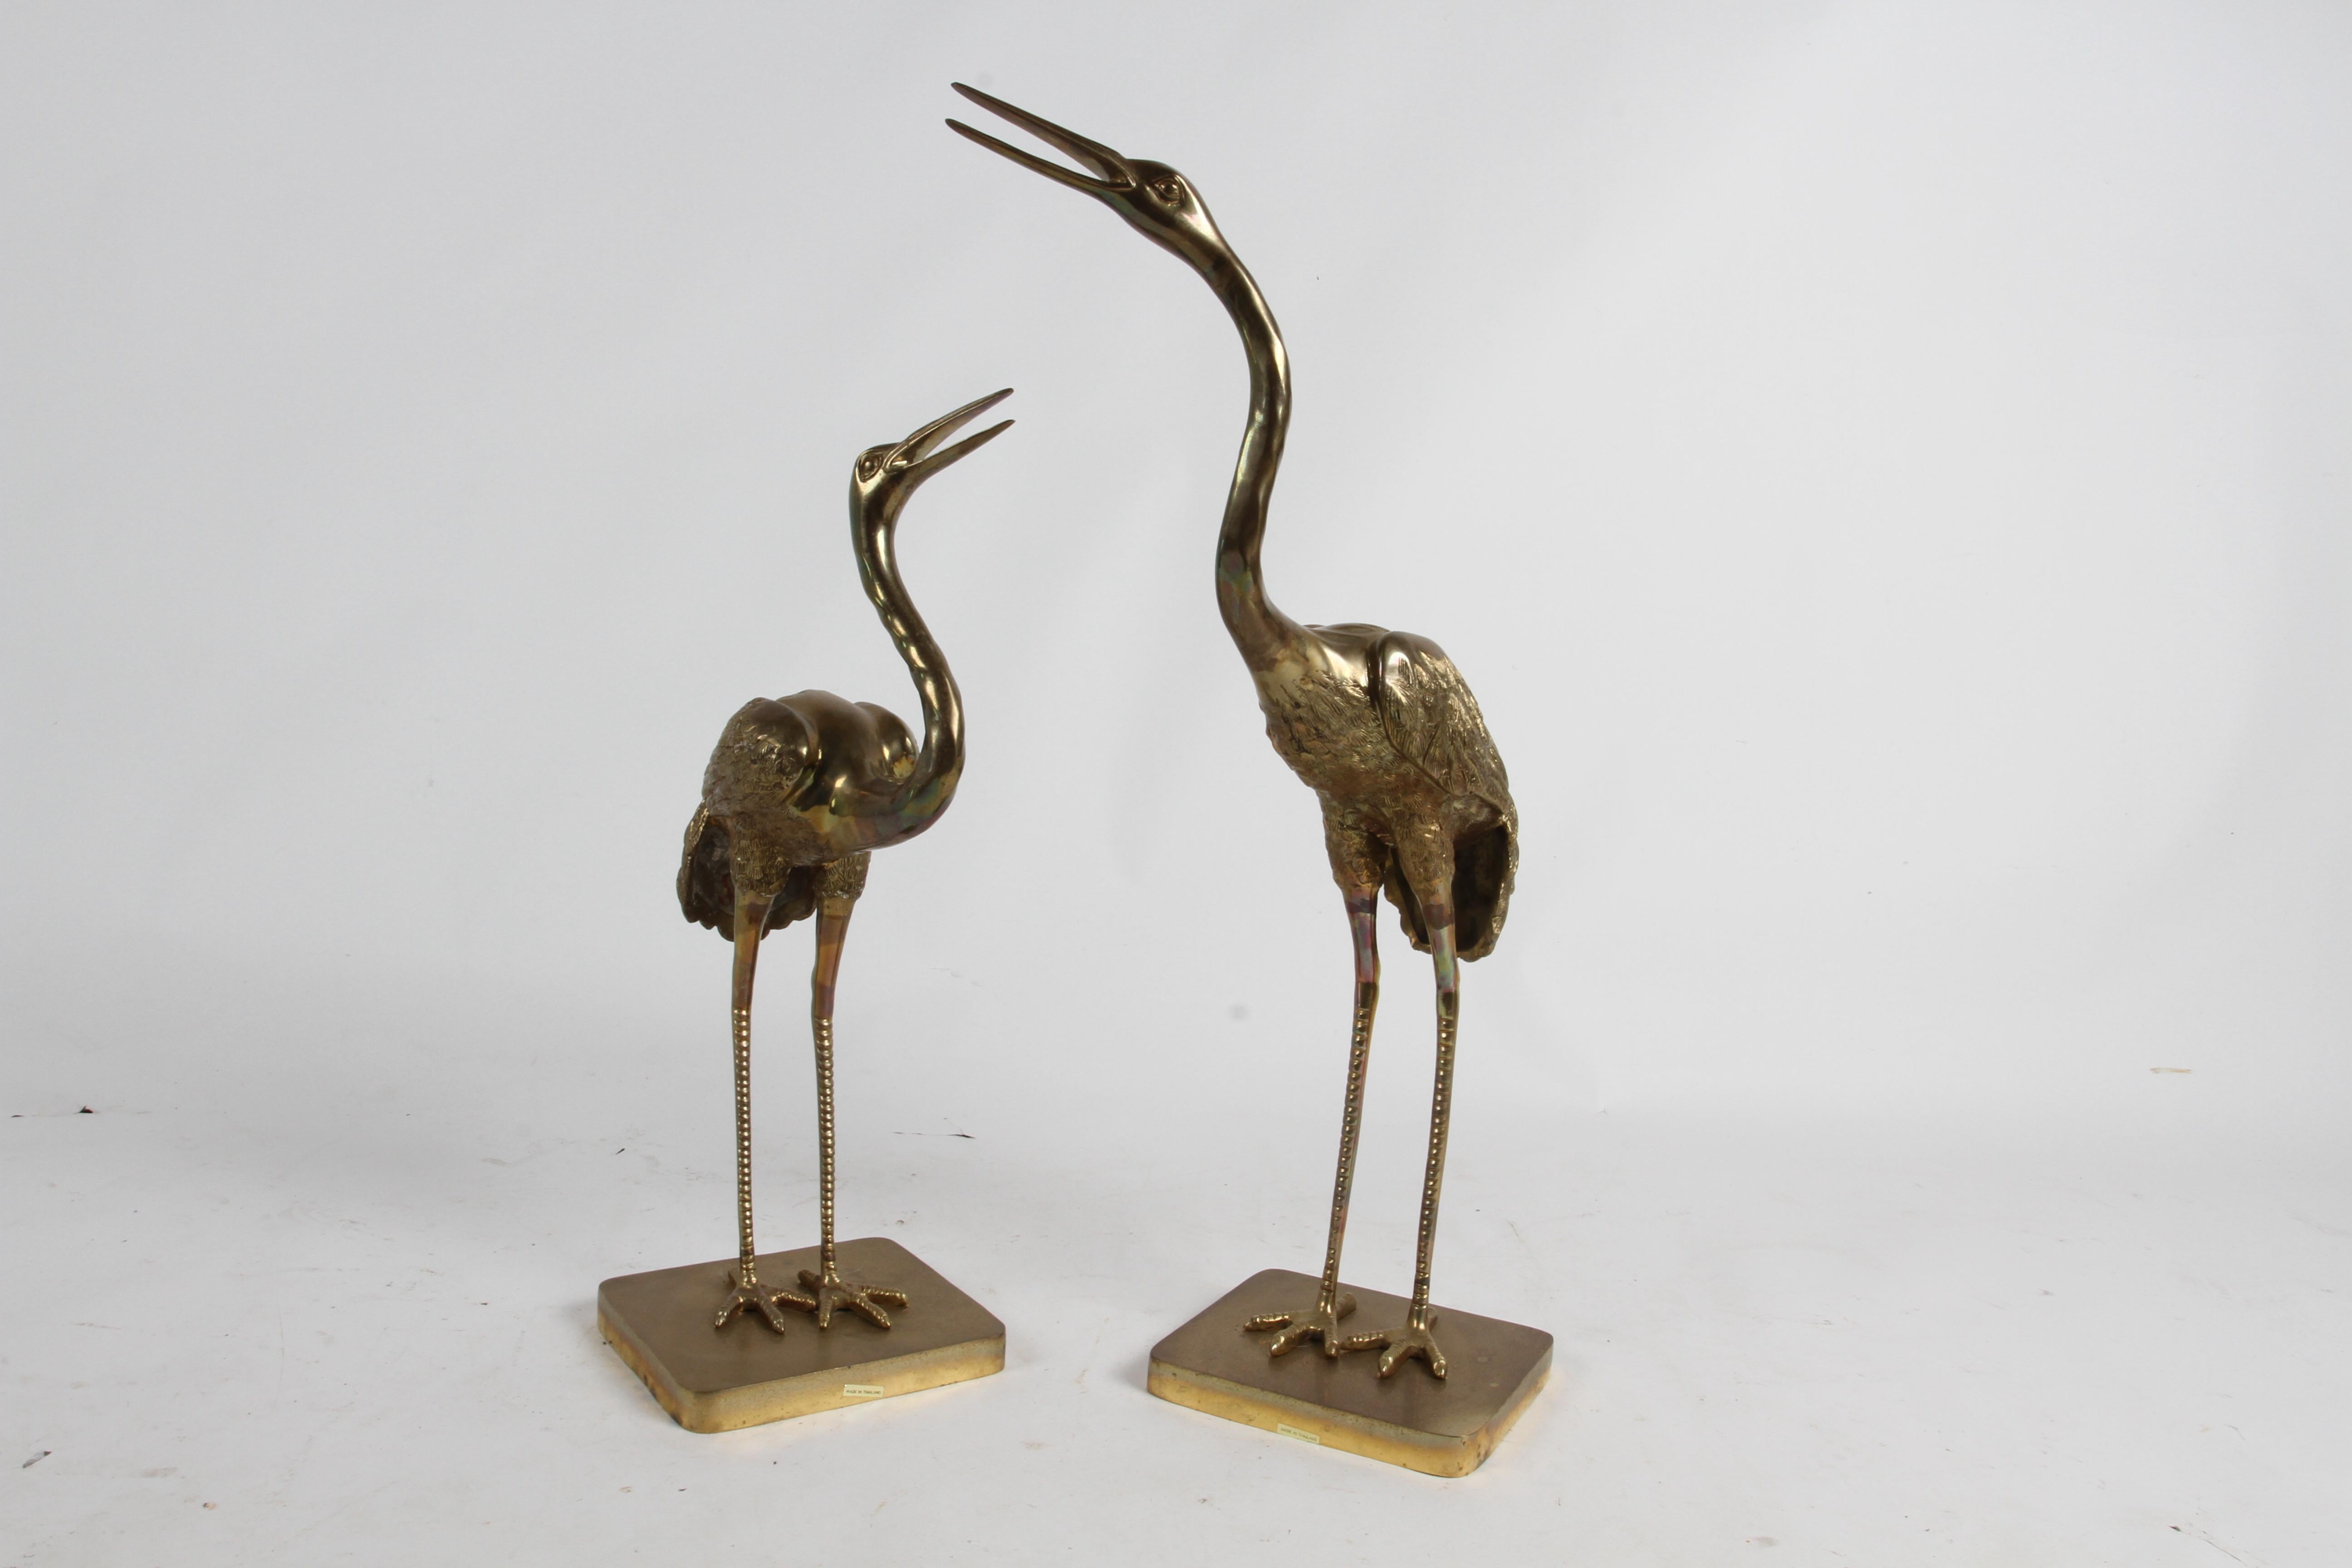 Pair of Hollywood Regency large brass cranes sculptures on square bases. These 1970s mid-century brass crane statues are well detailed and make great decorative accessories. Great patina. 

Large Crane 31.5